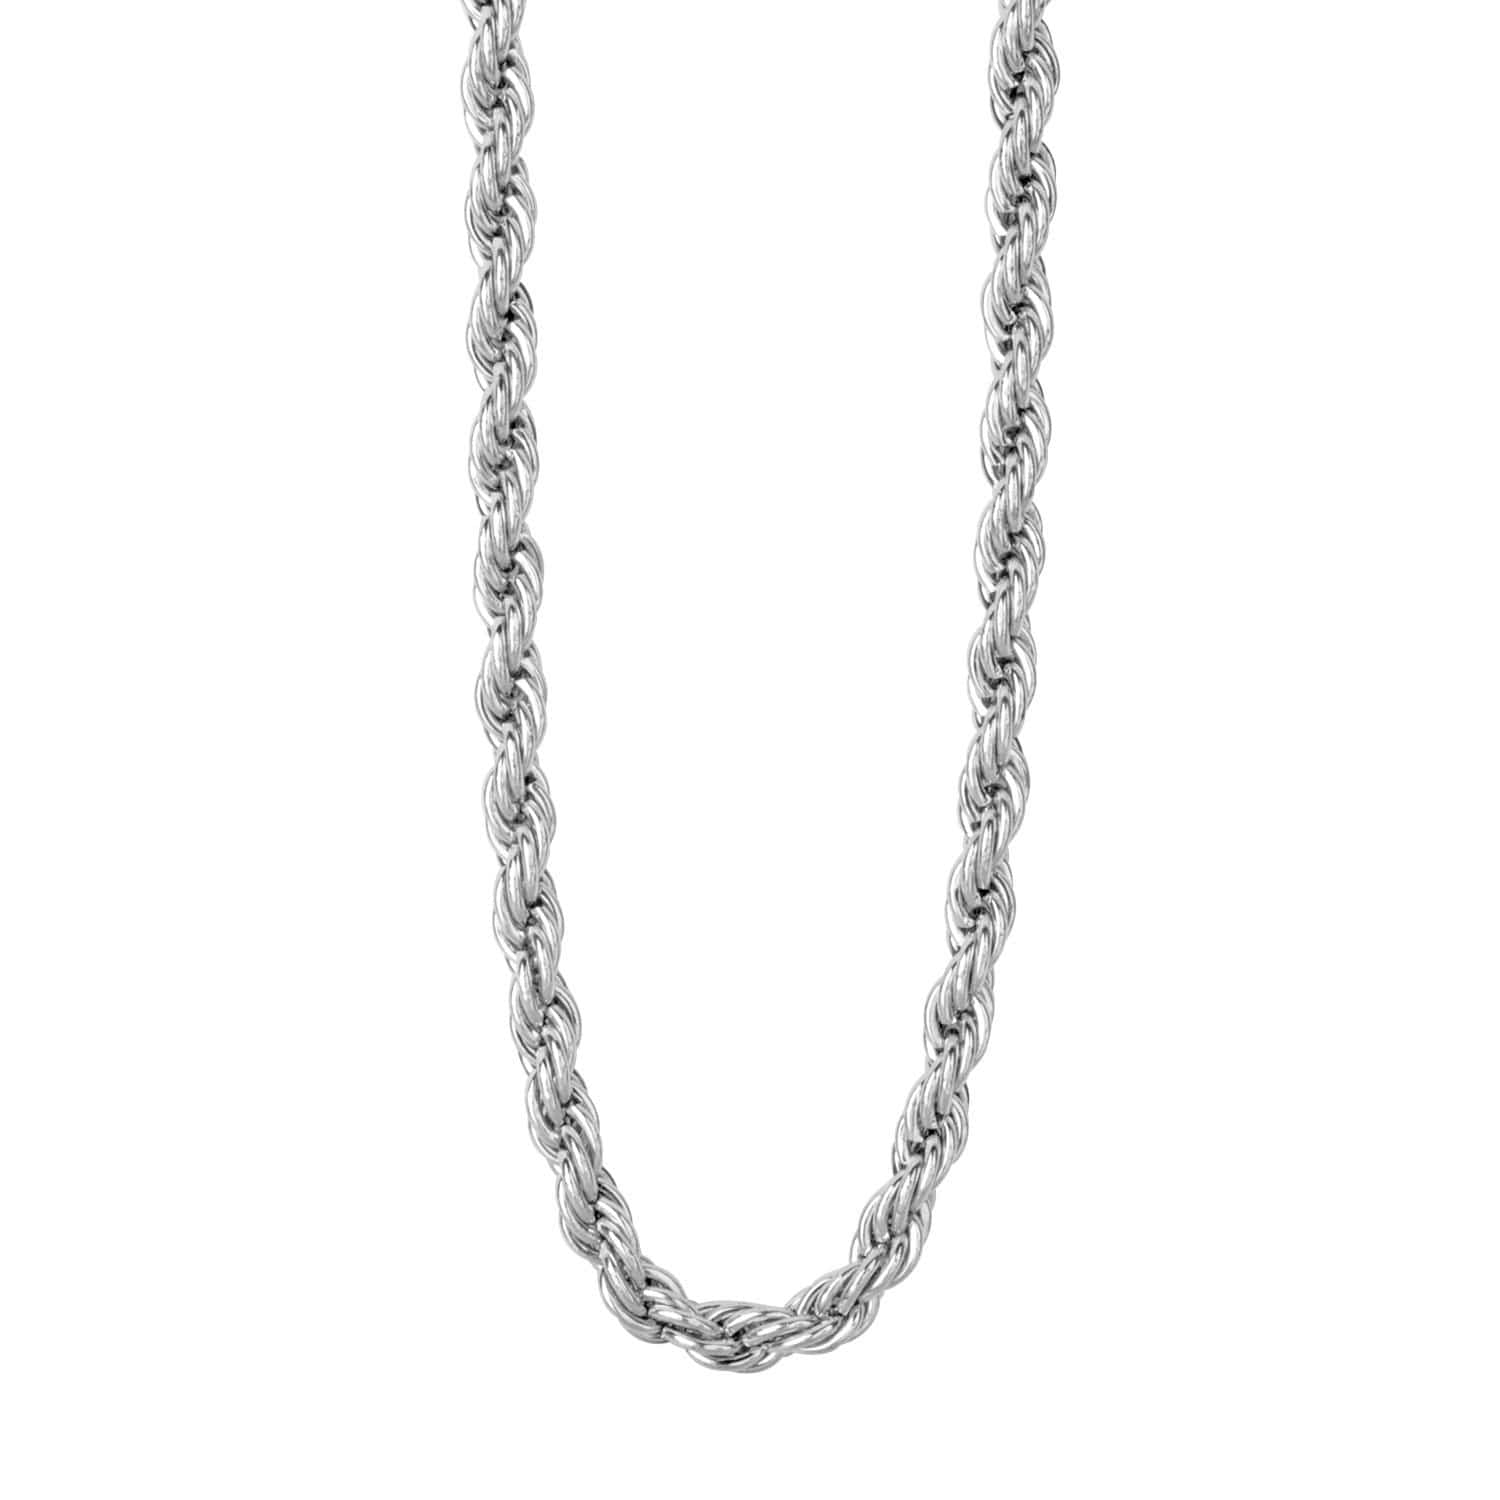 INOX JEWELRY Chains Silver Tone Stainless Steel 5mm French Rope Chain NSTC050-30